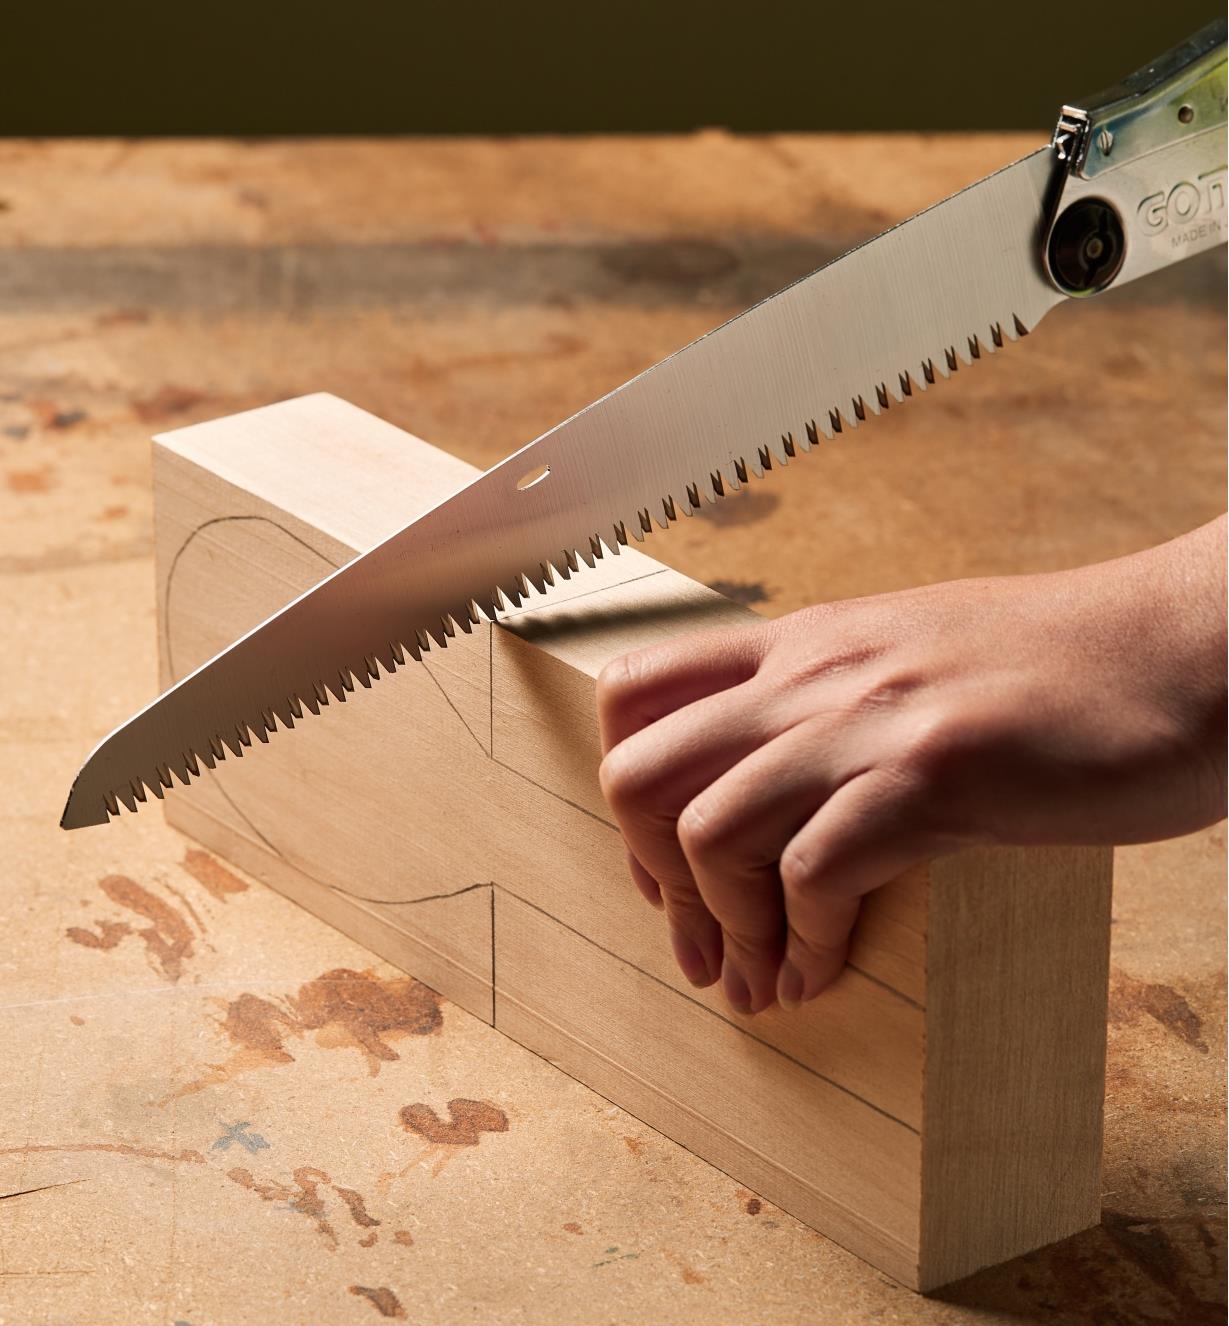 Preparing to make a cut in a wooden block using a Silky Gomboy folding saw